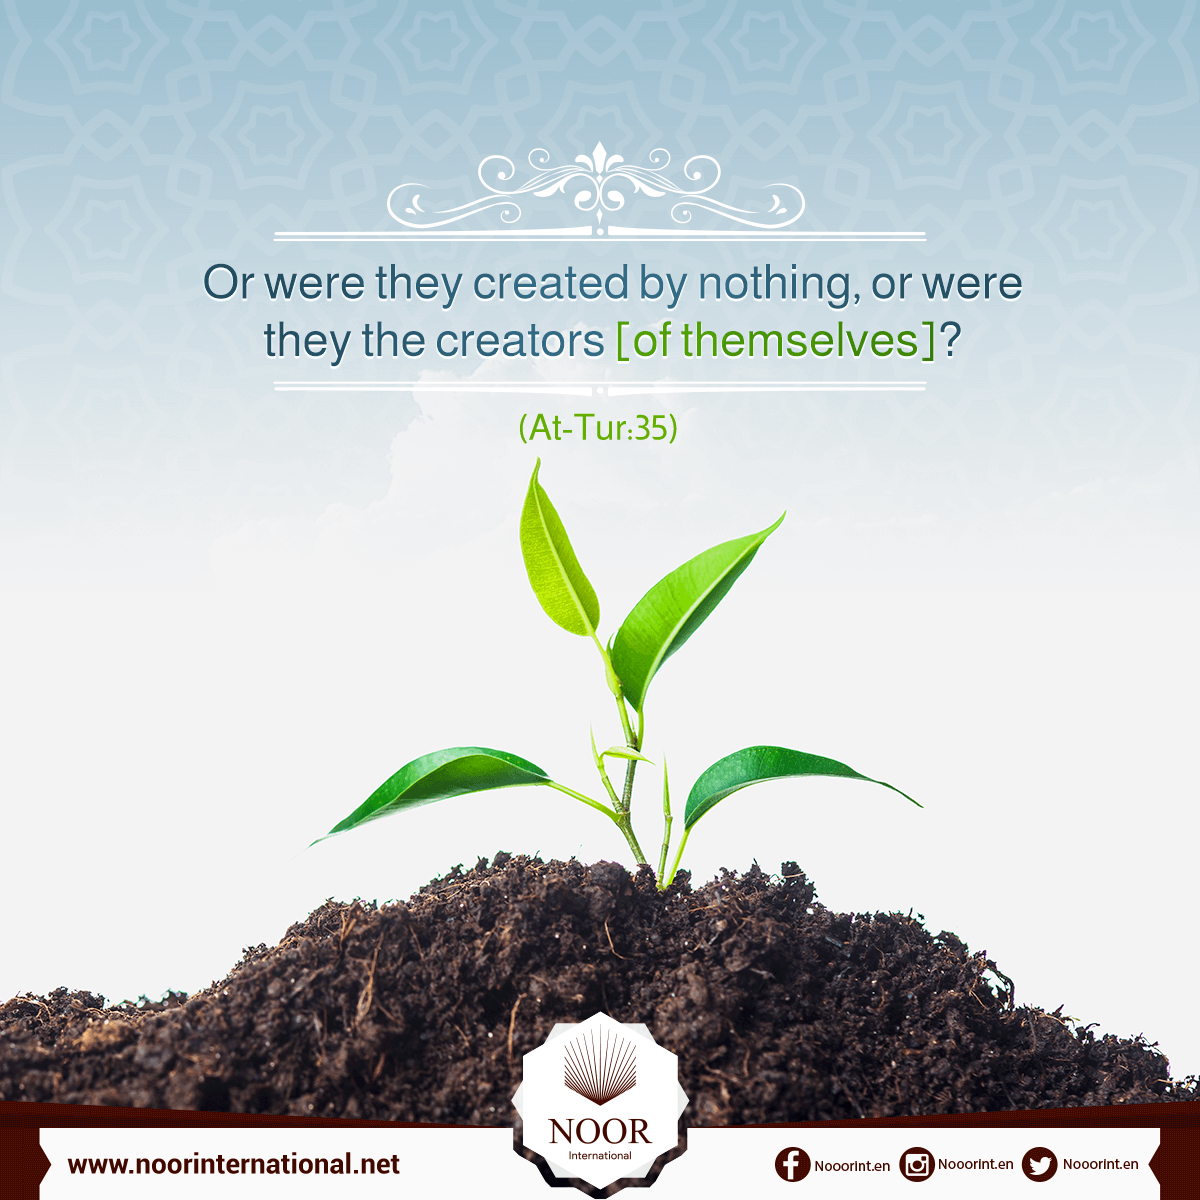 "Or were they created by nothing,..."